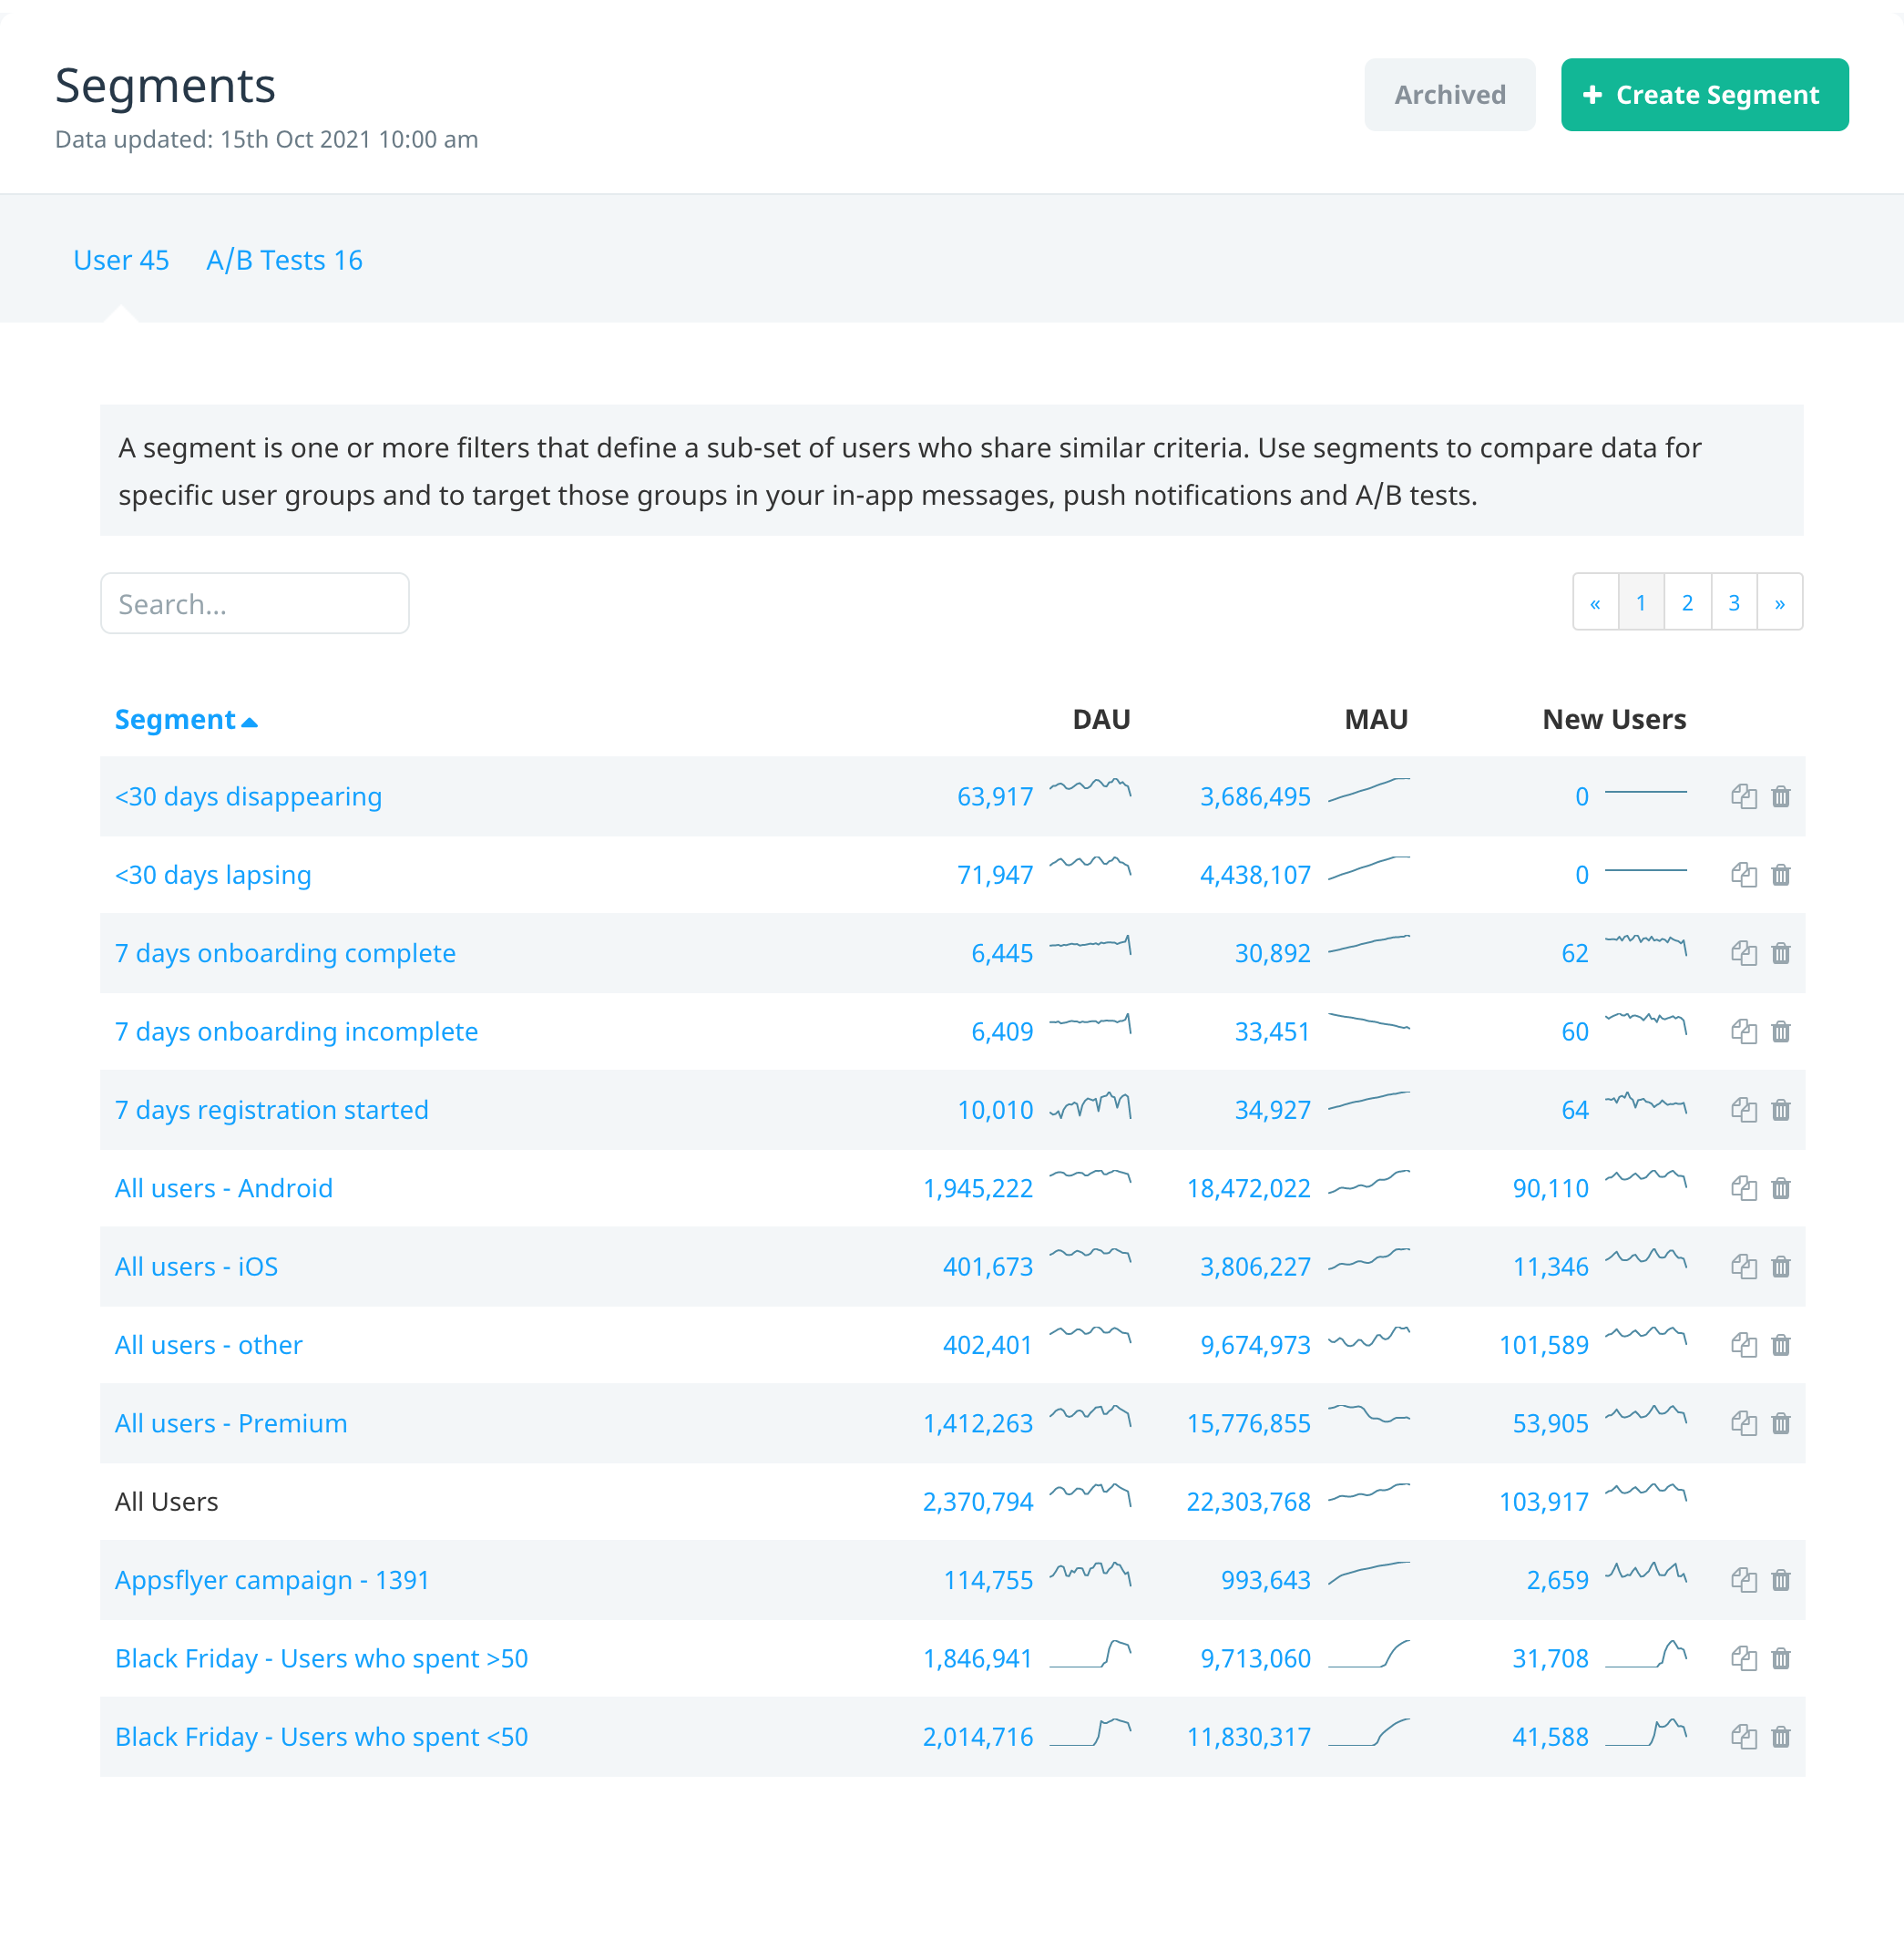 Segments management page showing a list of segments, with the options to search, archive, and create segments